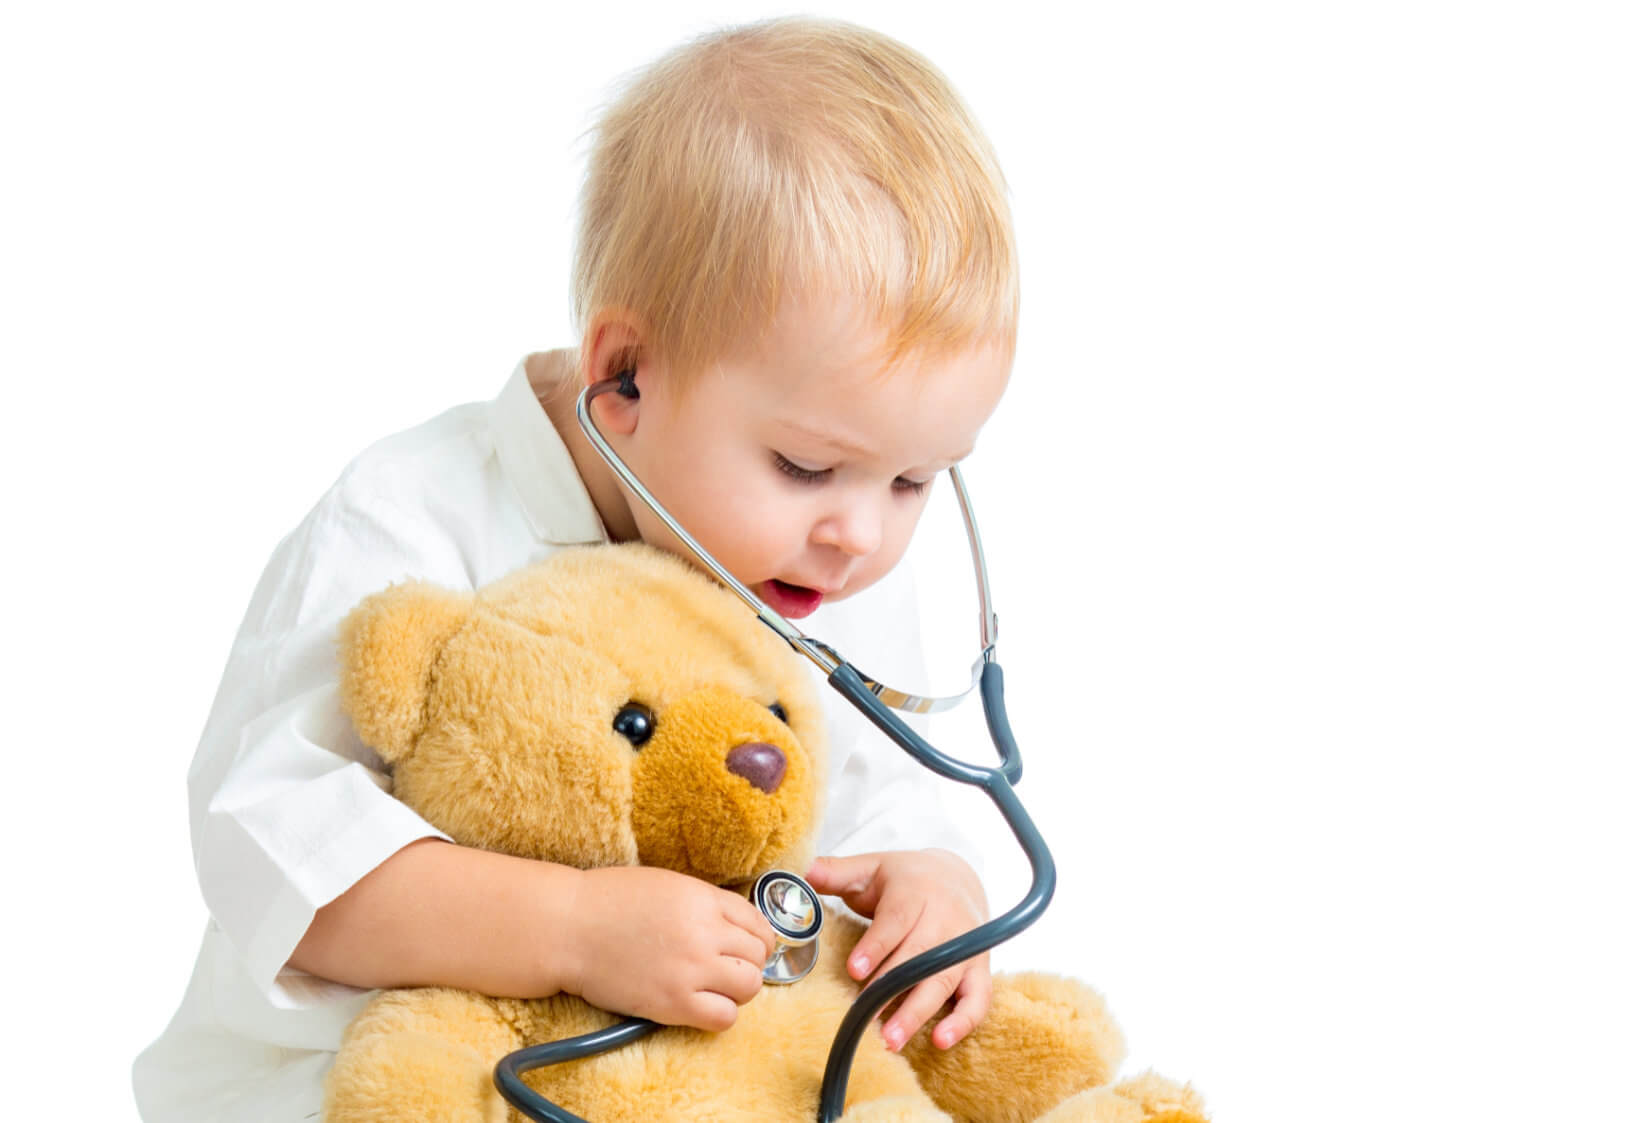 Paediatric First Aid Course Online, CPD Certified Training